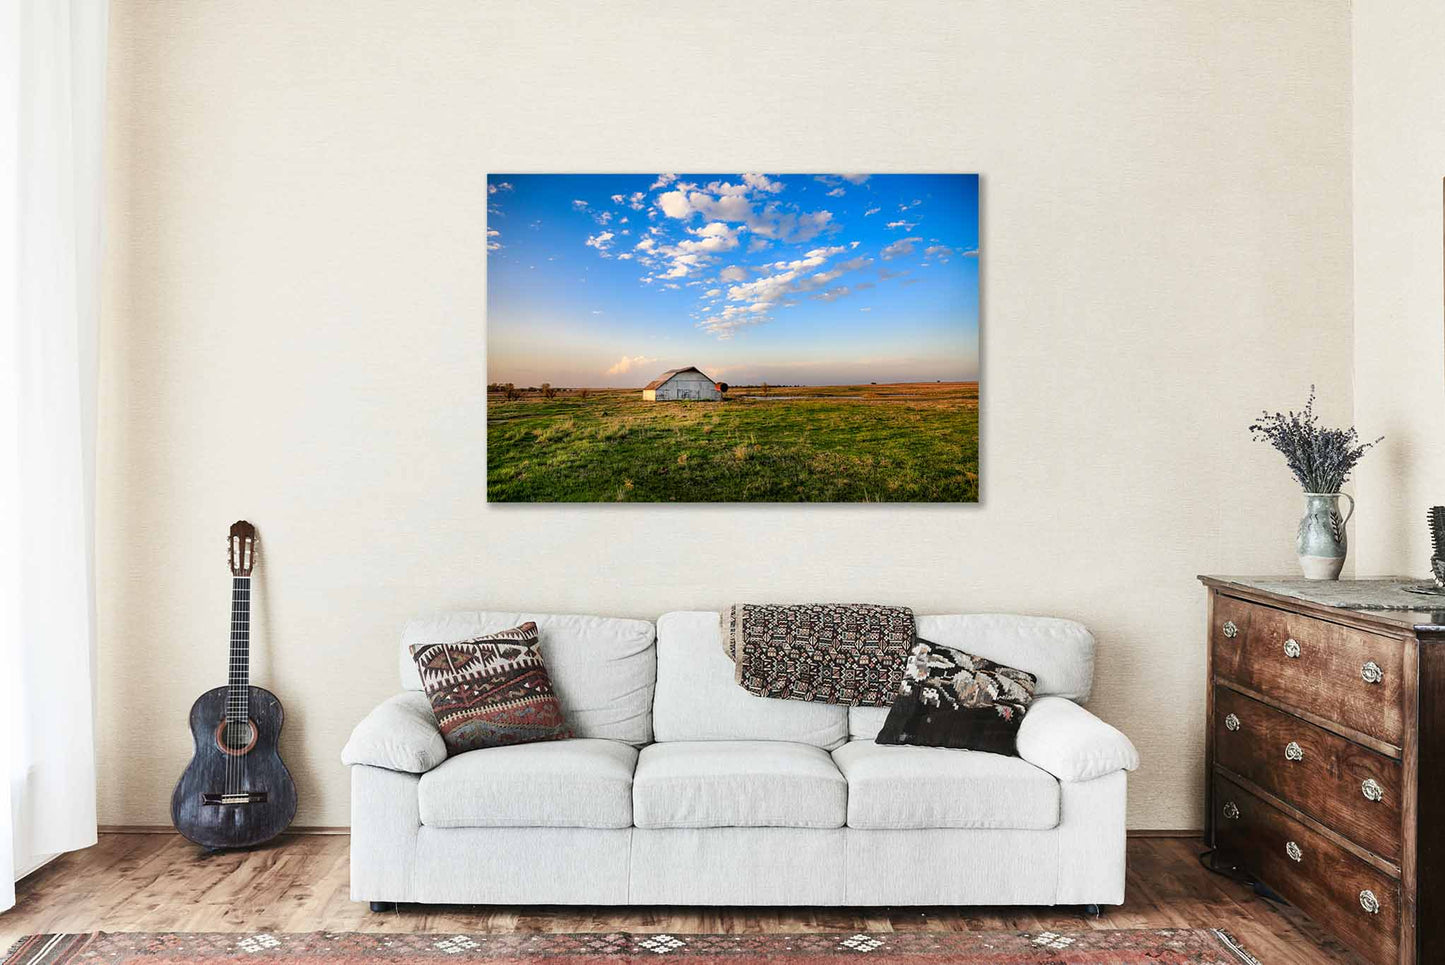 Country Metal Print | Barn Under Big Blue Sky Photo | Rural Photography | Oklahoma Picture | Farmhouse Decor